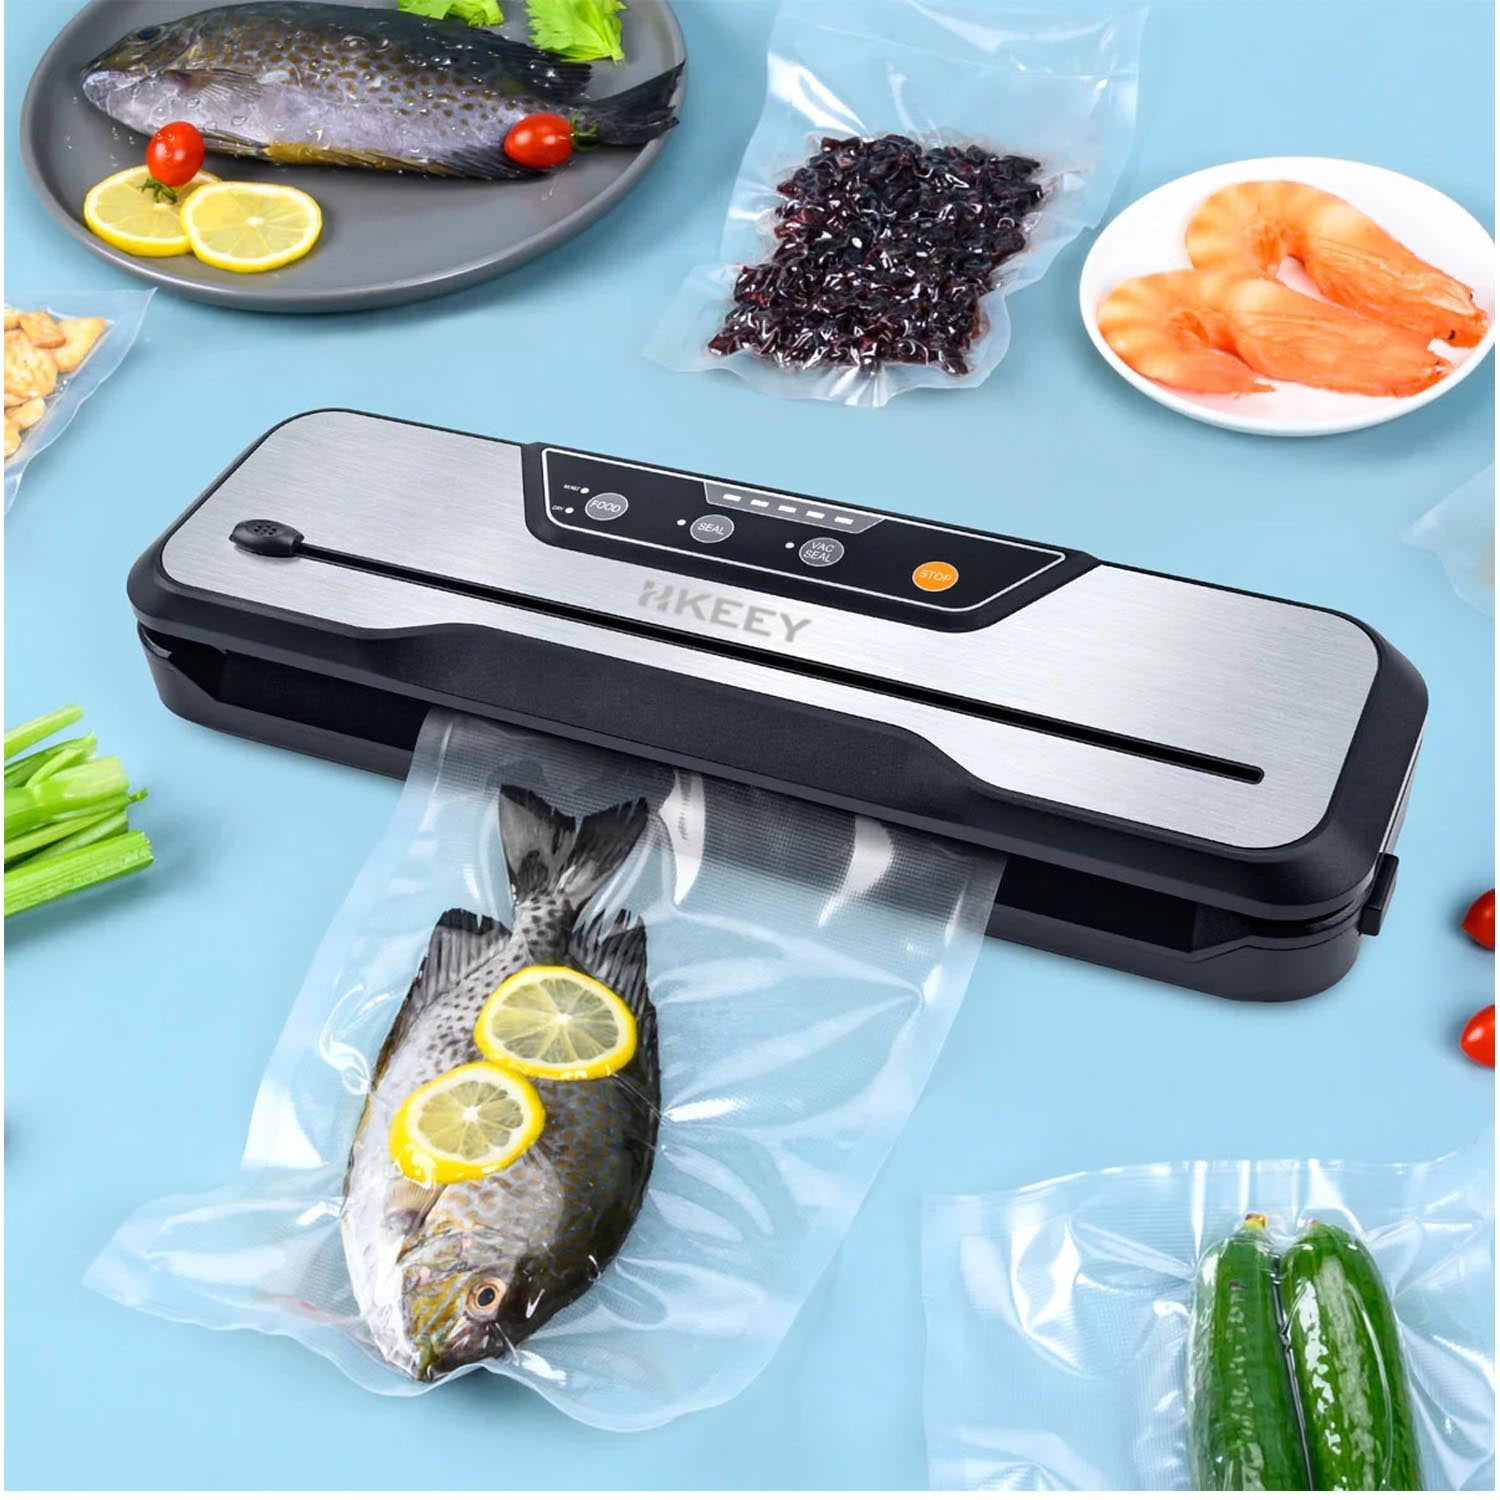  Vacuum Sealer Machine for Food Saver, Dry/Moist Modes with  Automatic Air Sealing System,Stainless Steel ,Compact Design with 15 Vacuum  Seal Bags & 1 Air Suction Hose, Silver: Home & Kitchen